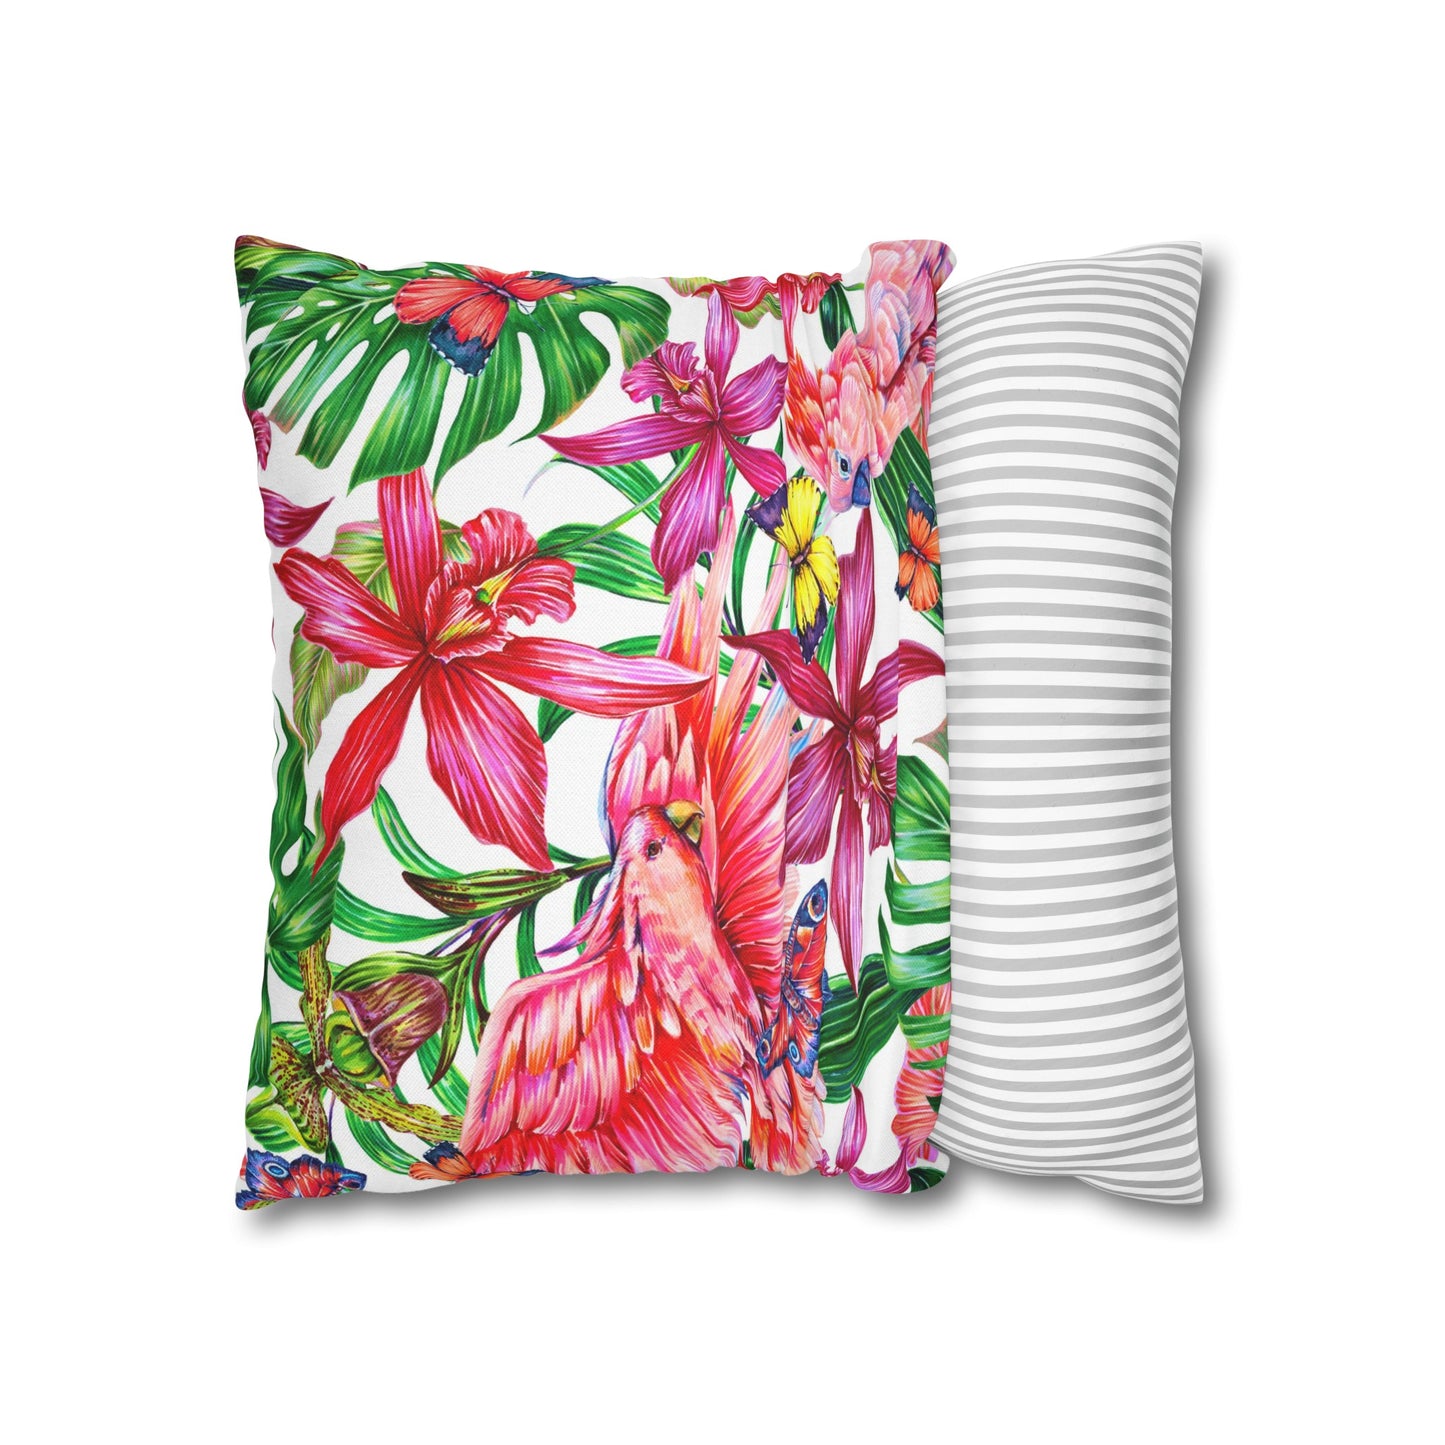 Nama'stay in Costa Rica Pillow - Cover Only